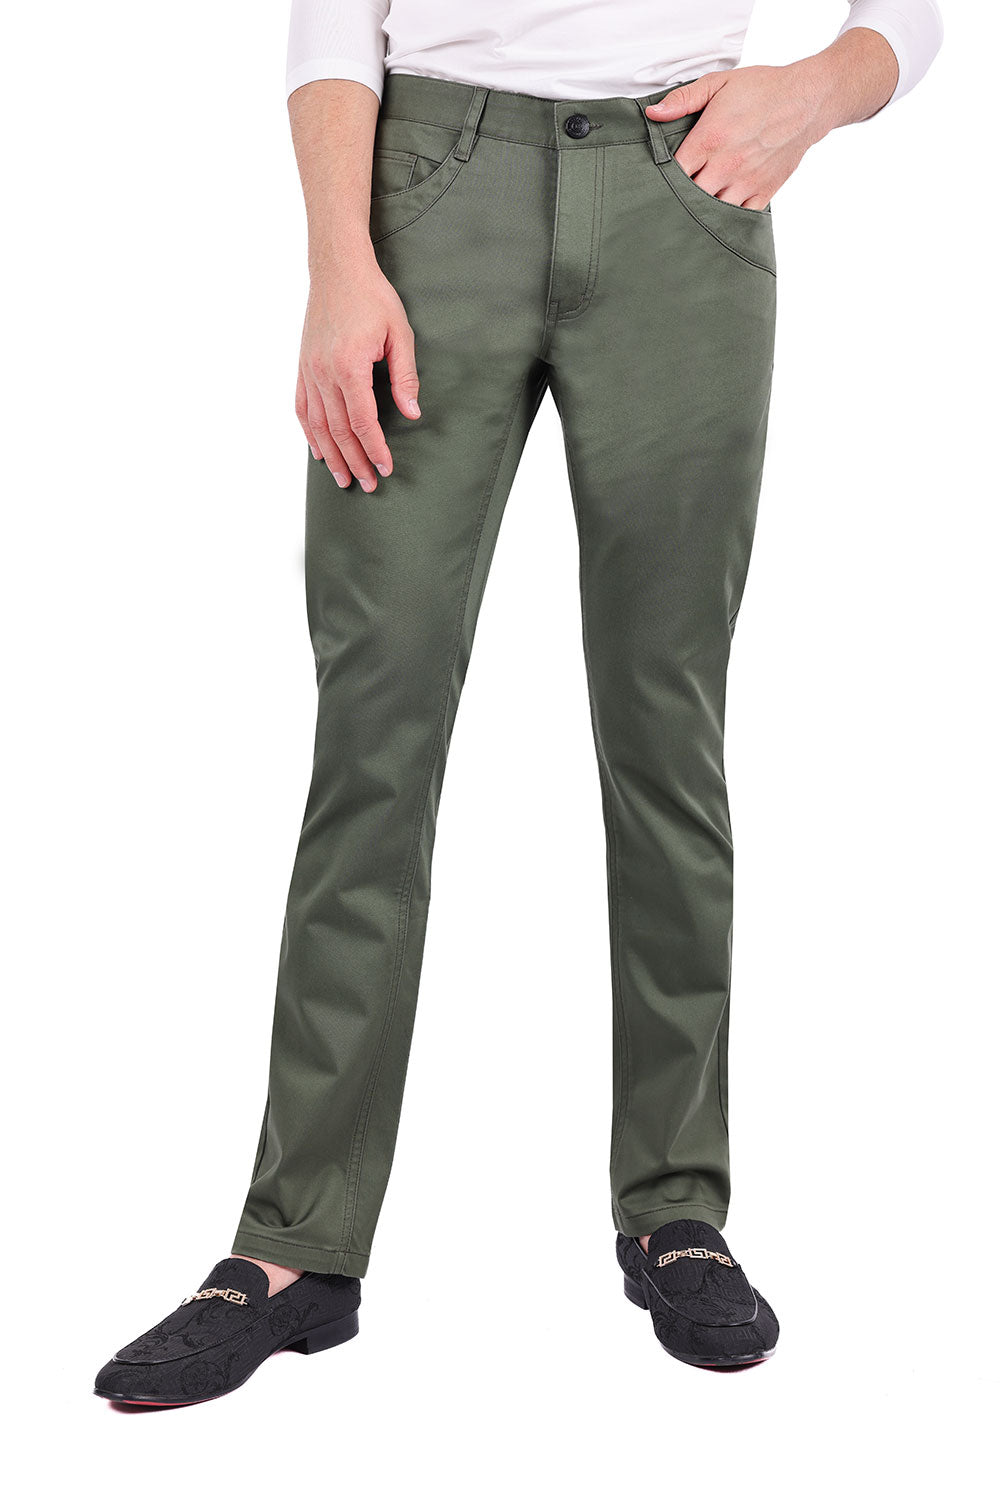 Barabas Men's Solid Color Basic Essential Chino Dress Pants 3CPW31 olive